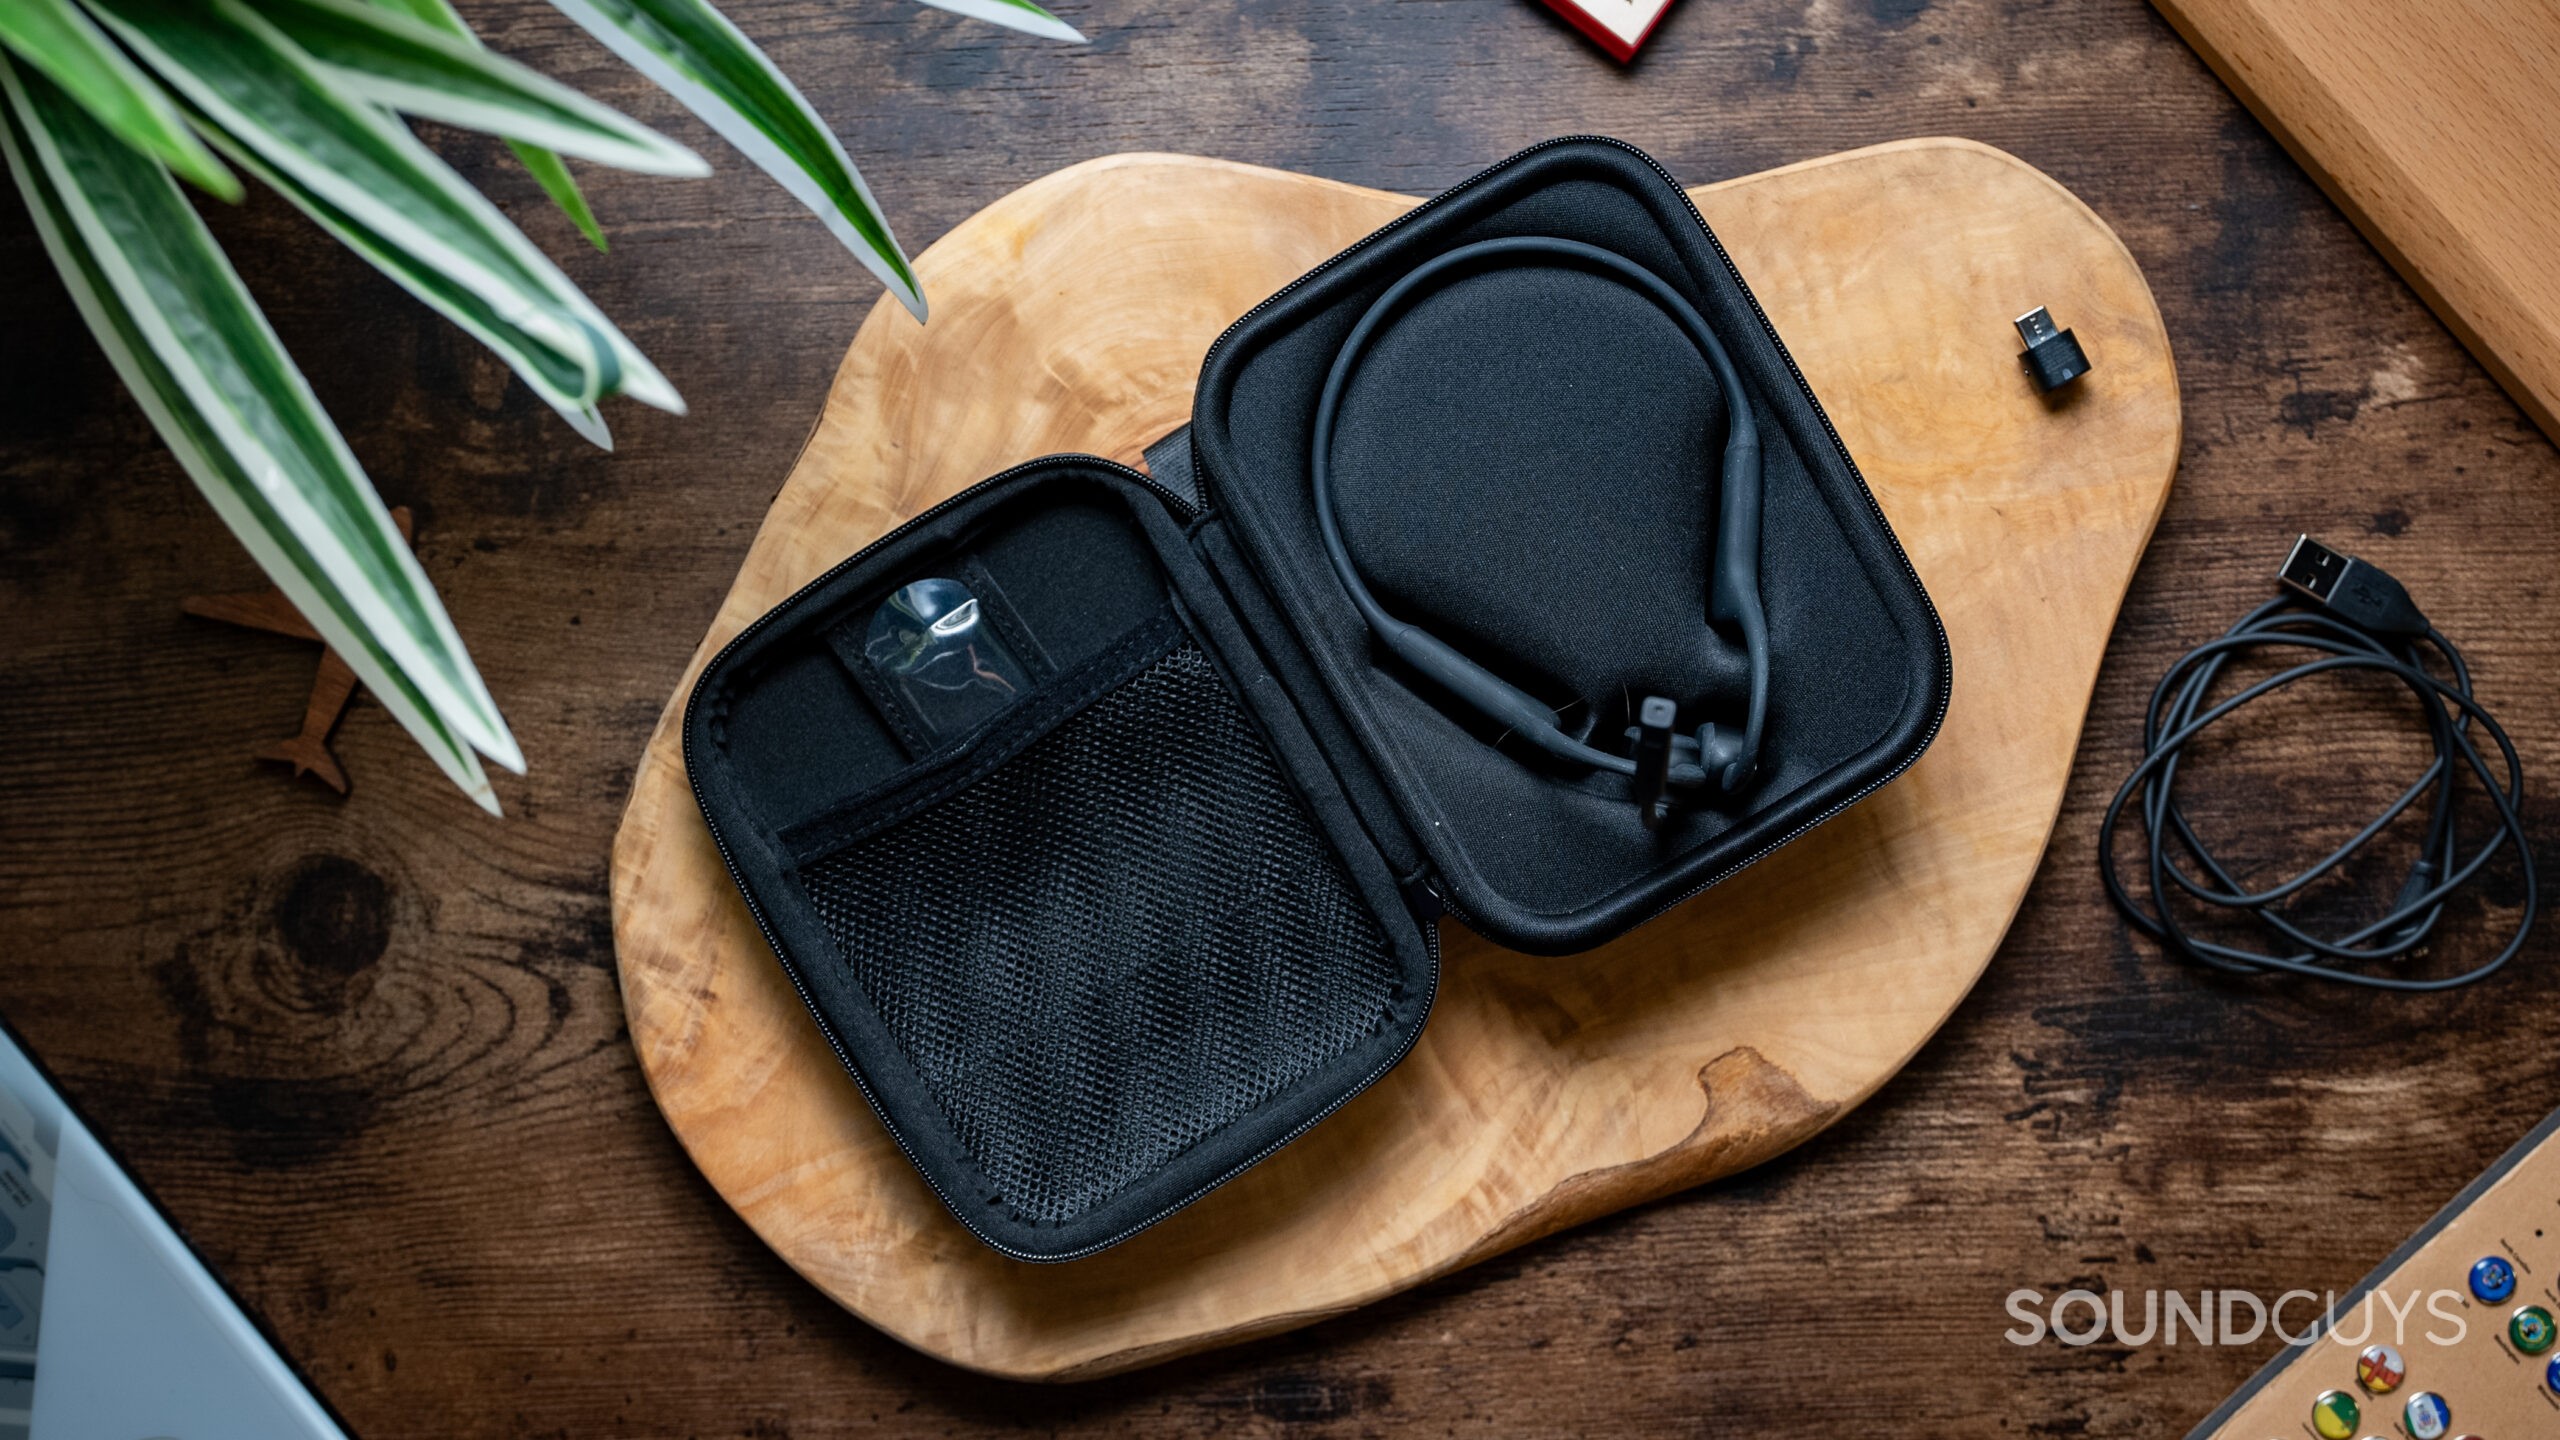 The zip case for the Shokz OpenComm2 UC rests on a wood table unzipped showing the headset inside.